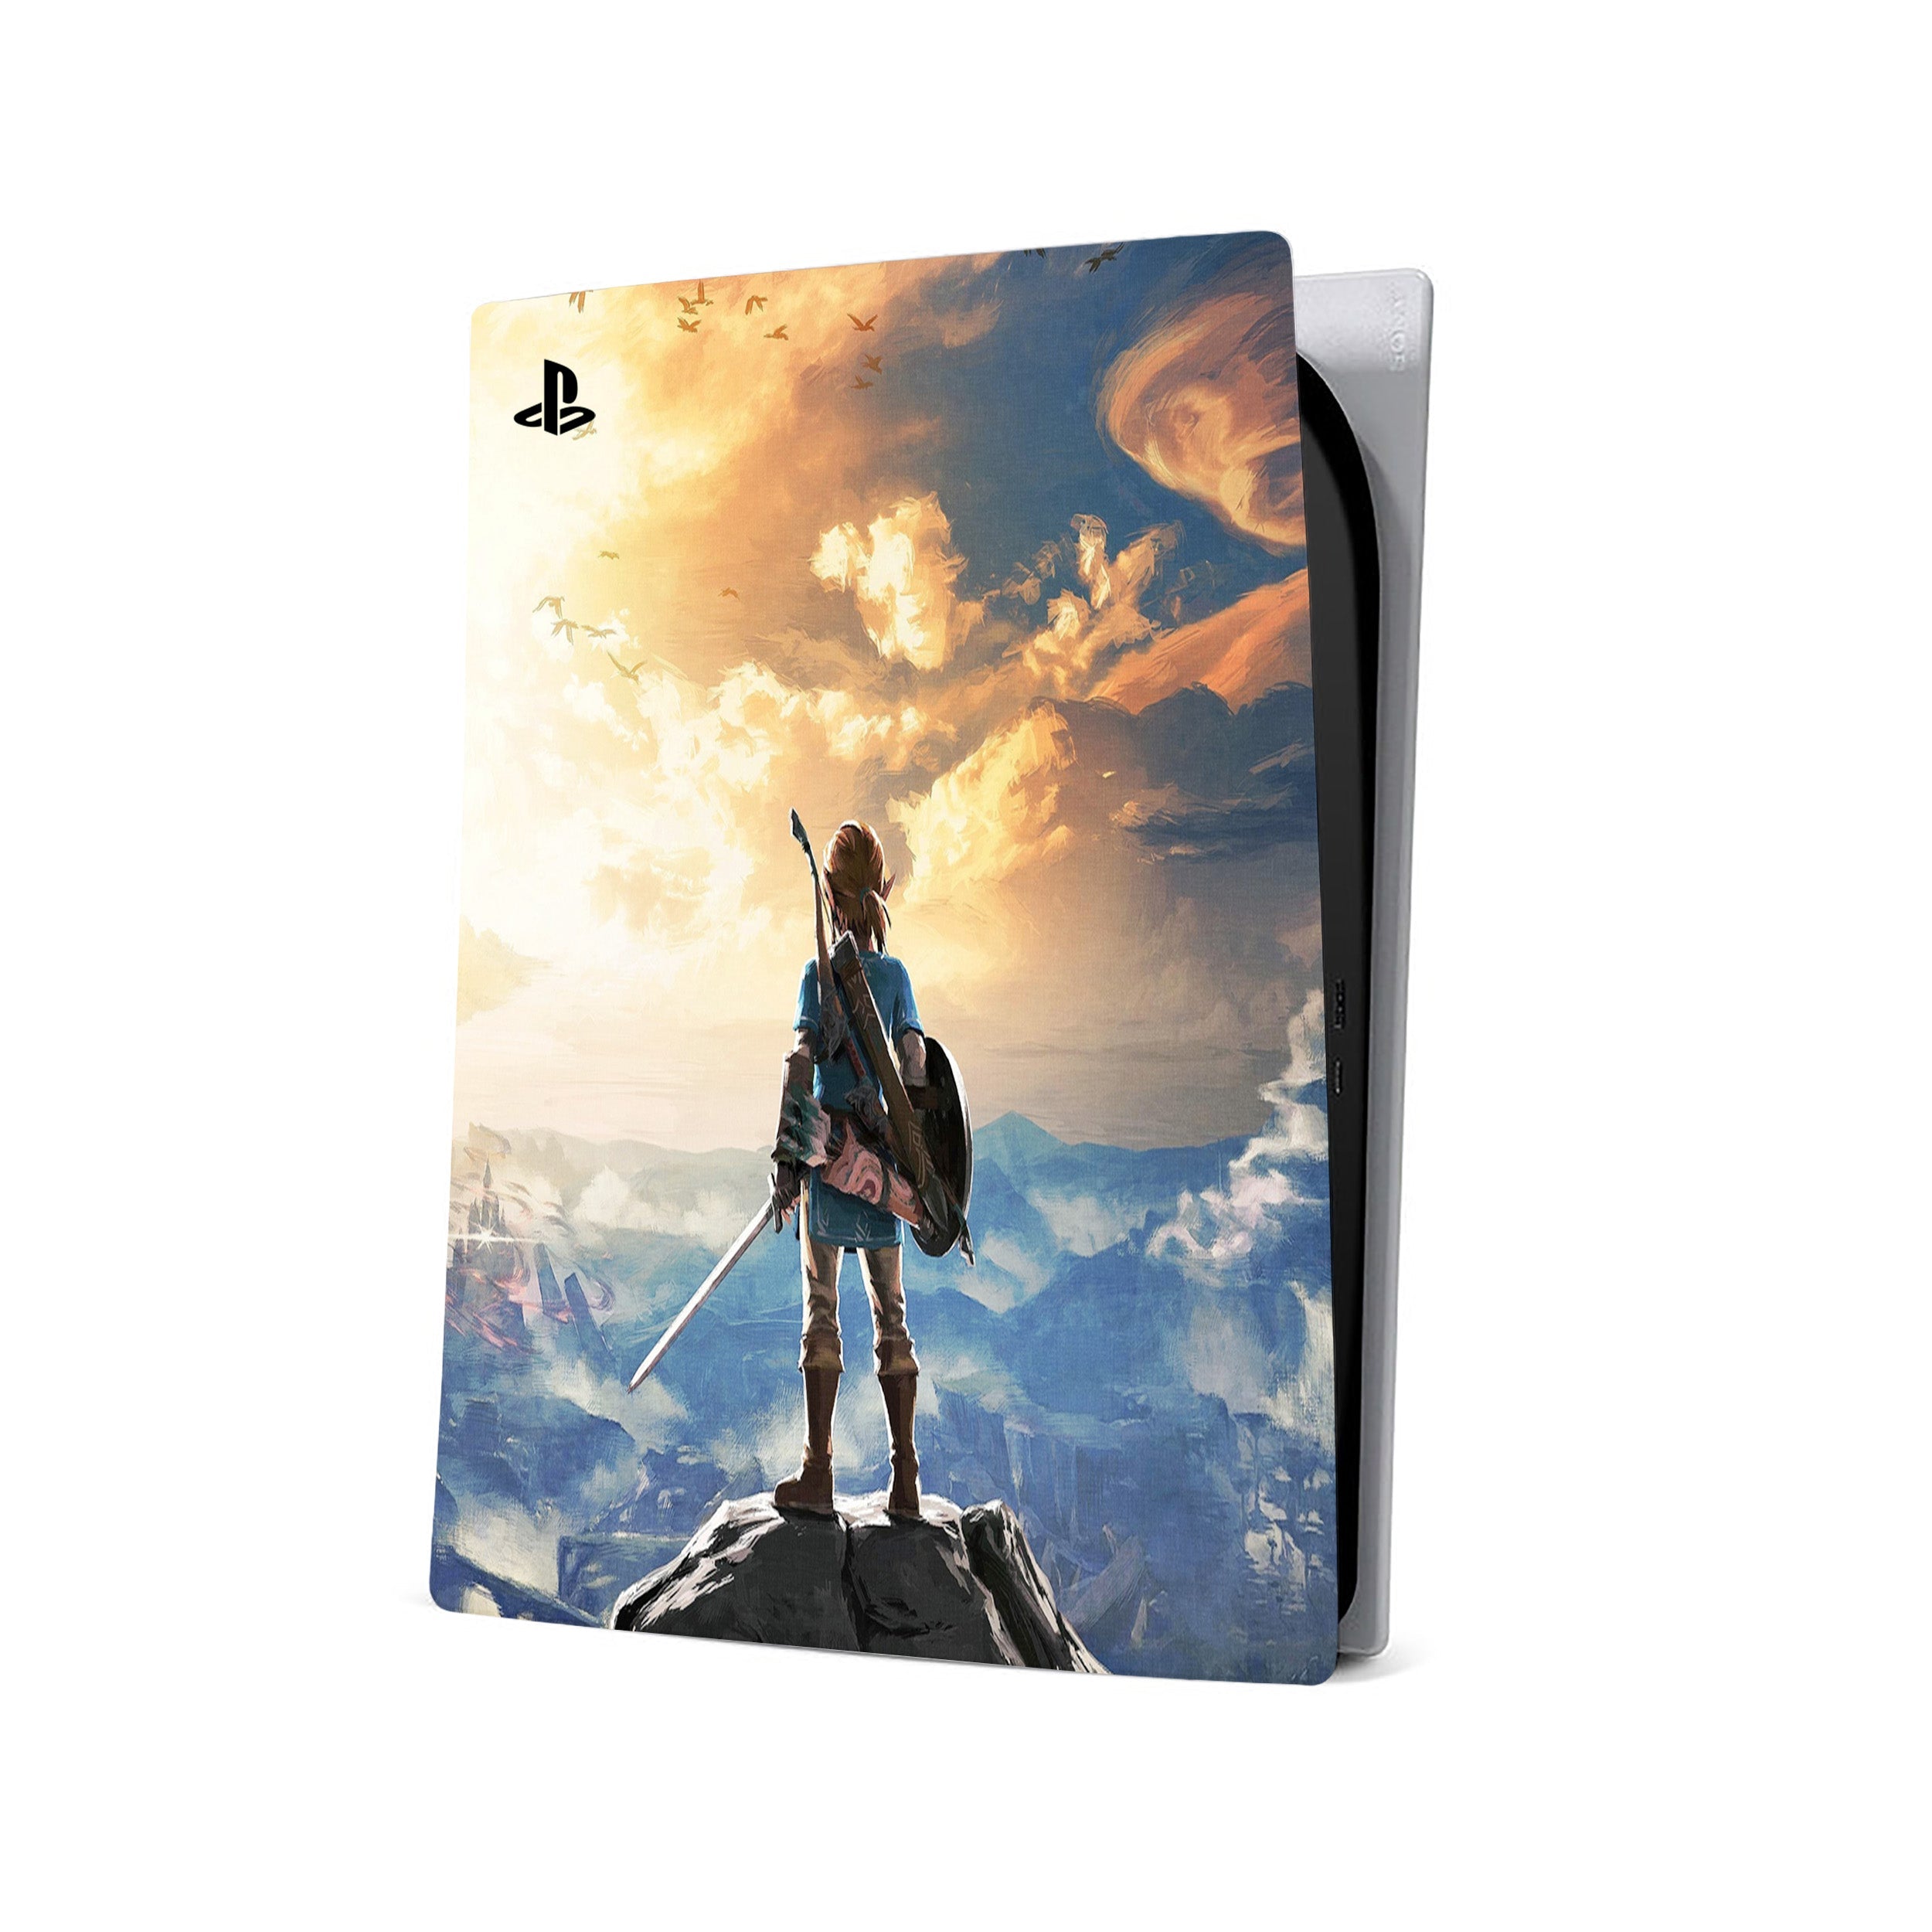 A video game skin featuring a Zelda design for the PS5.